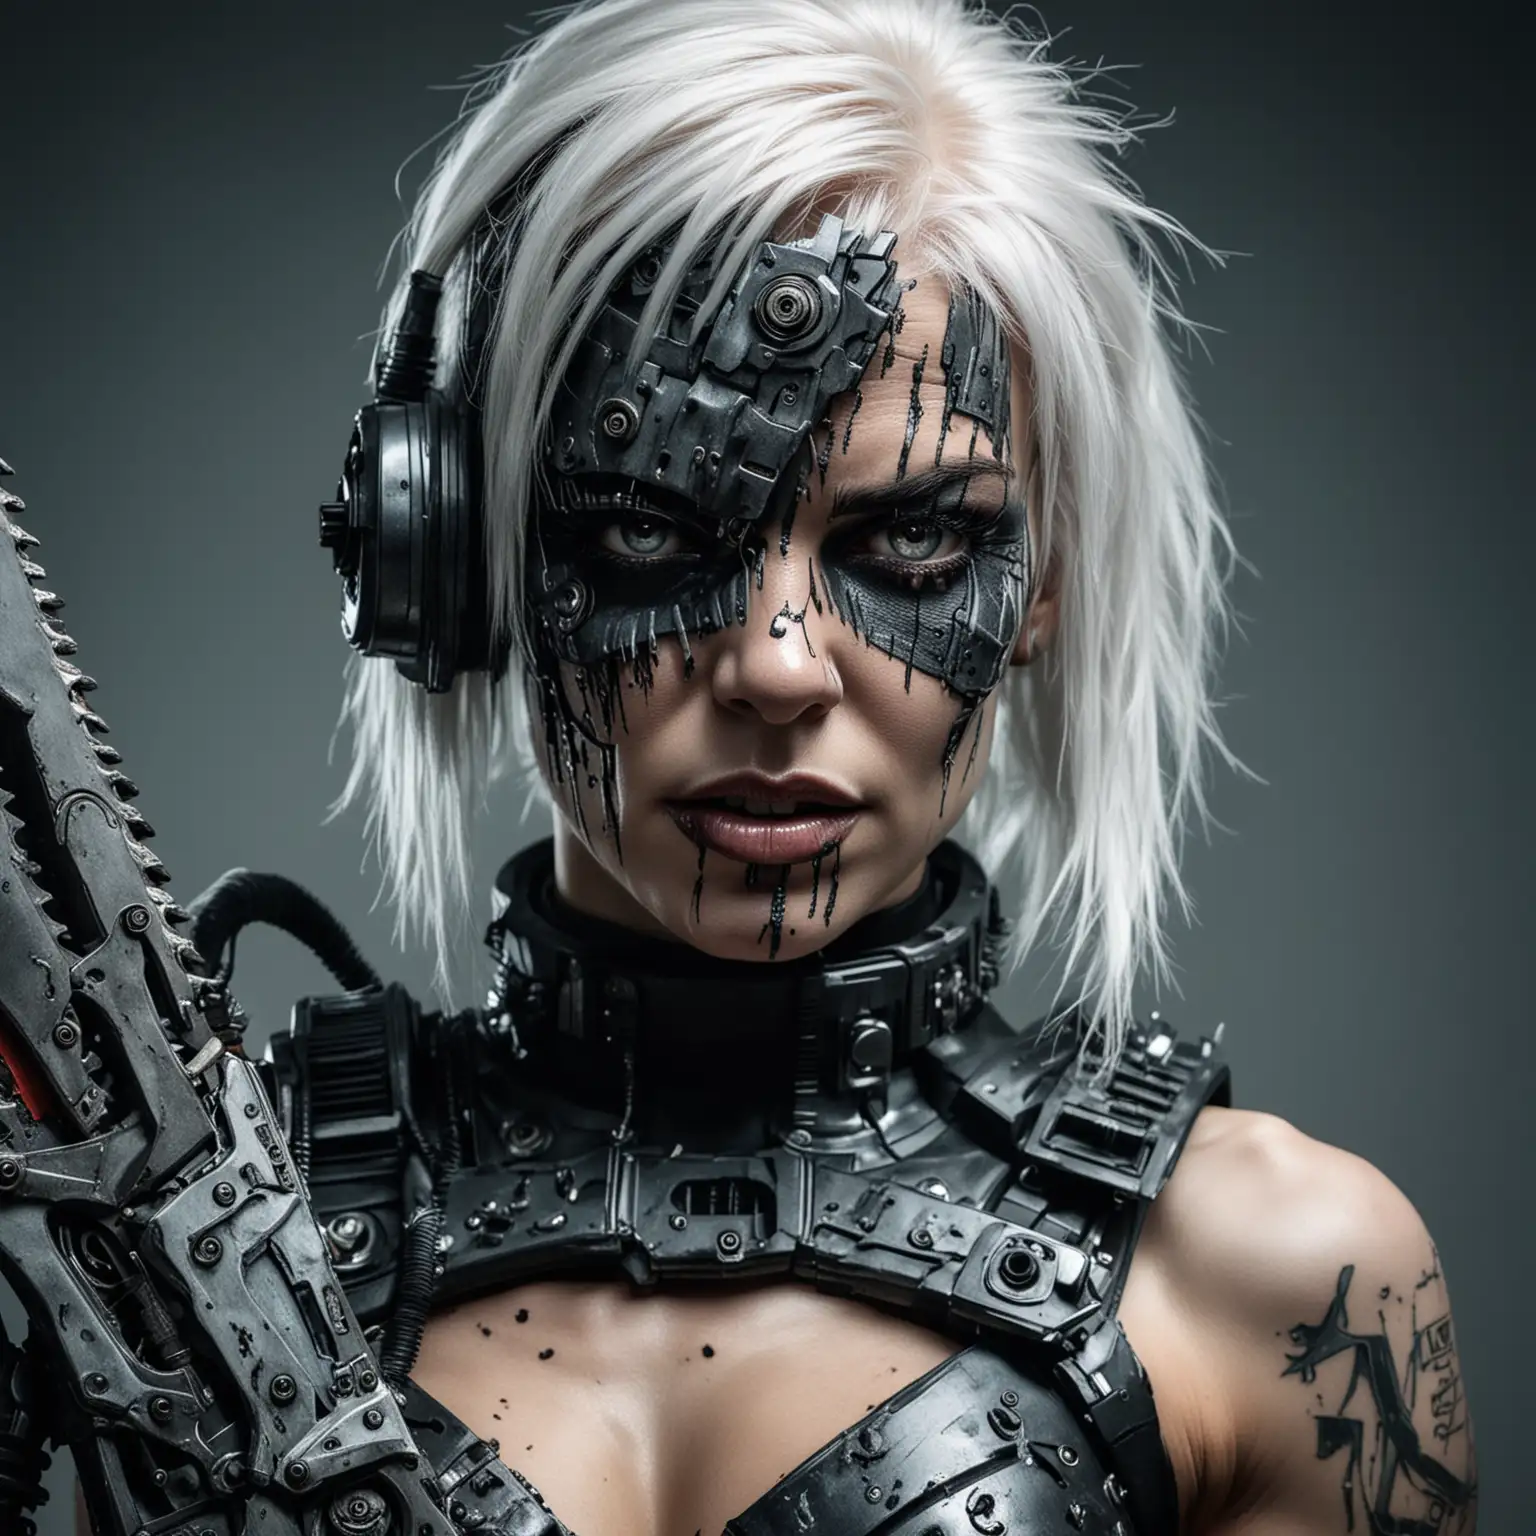 Scarred cyberpunk woman holding a chainsaw, muscular, grotesque modifications and armor, one laser eye, cyber helmet, chrome metal, her mouth is covered, white hair